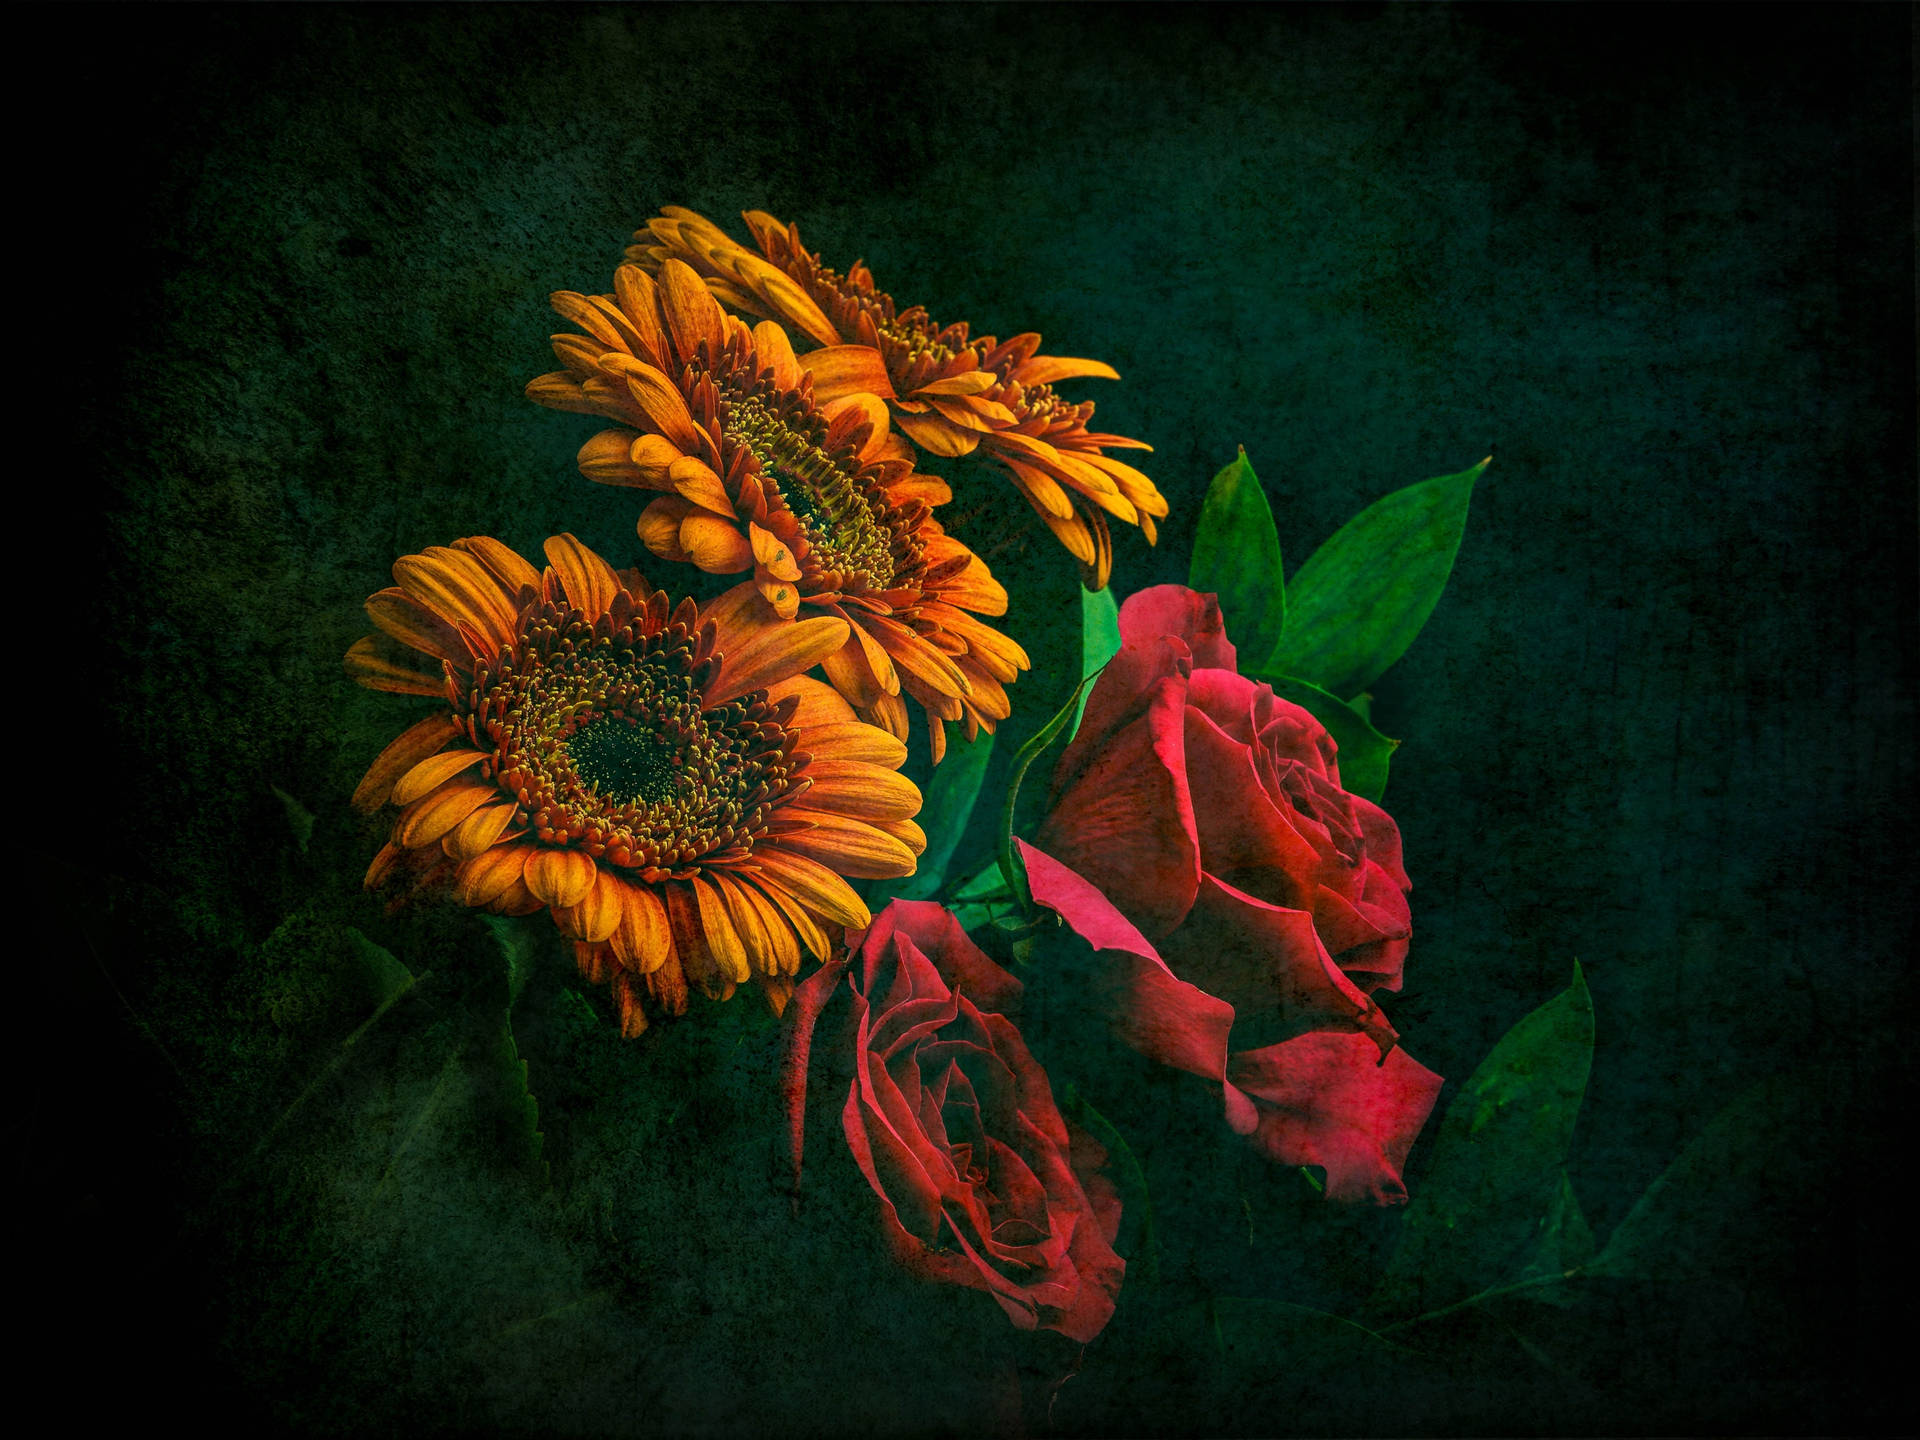 A breathtaking floral view of a bouquet of sunflowers, roses and greenery. Wallpaper